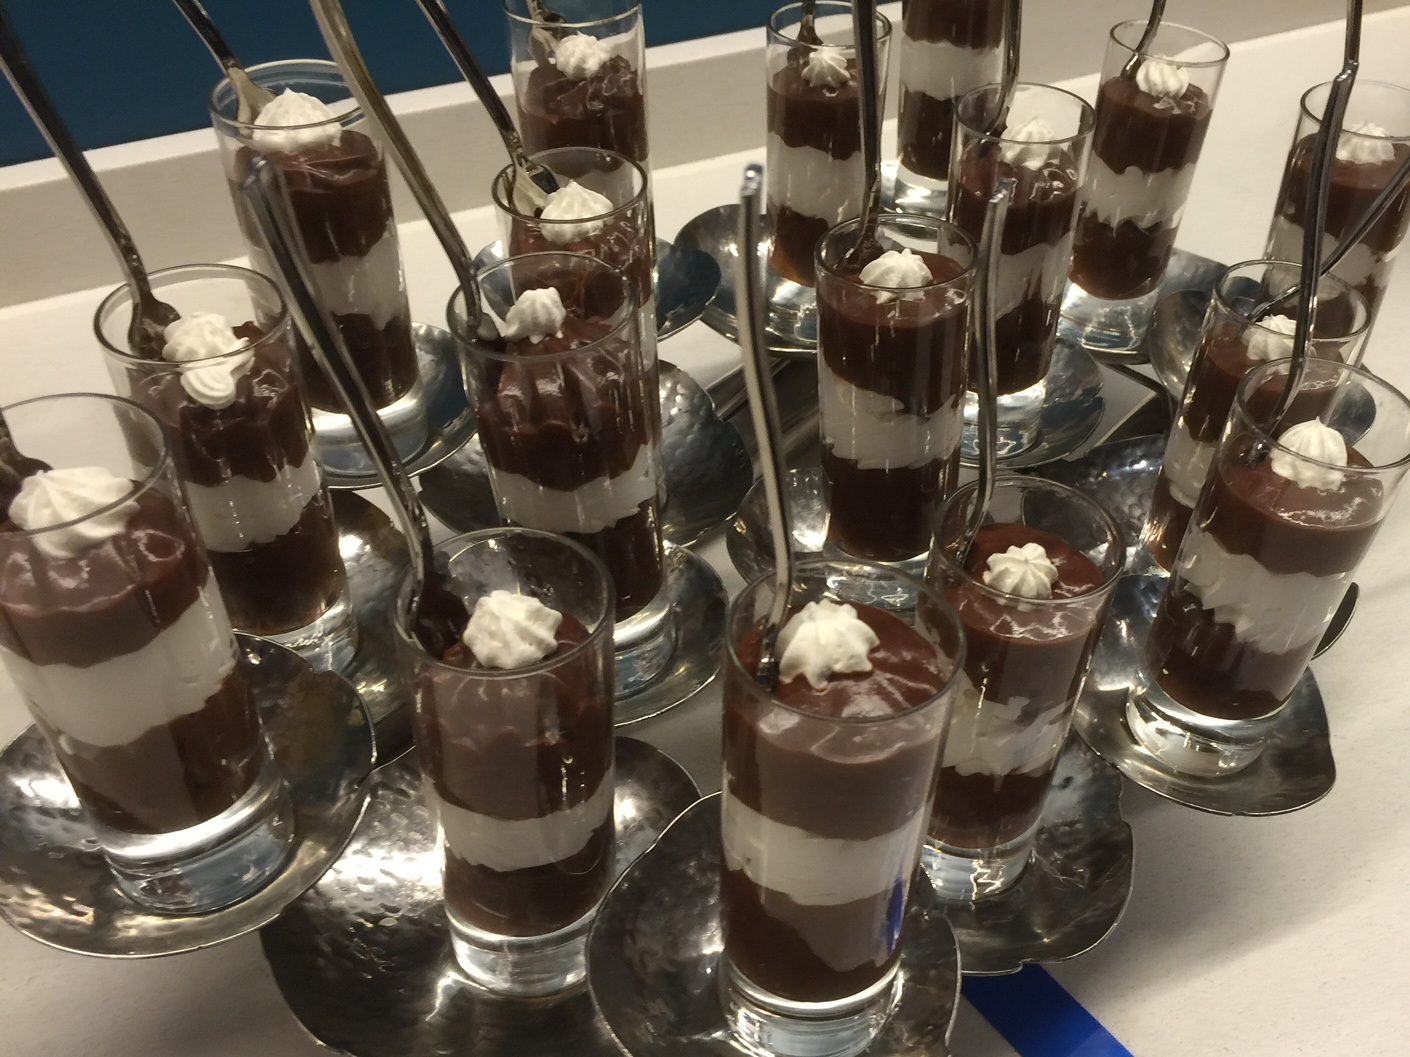 Chocolate Mousse Shooters